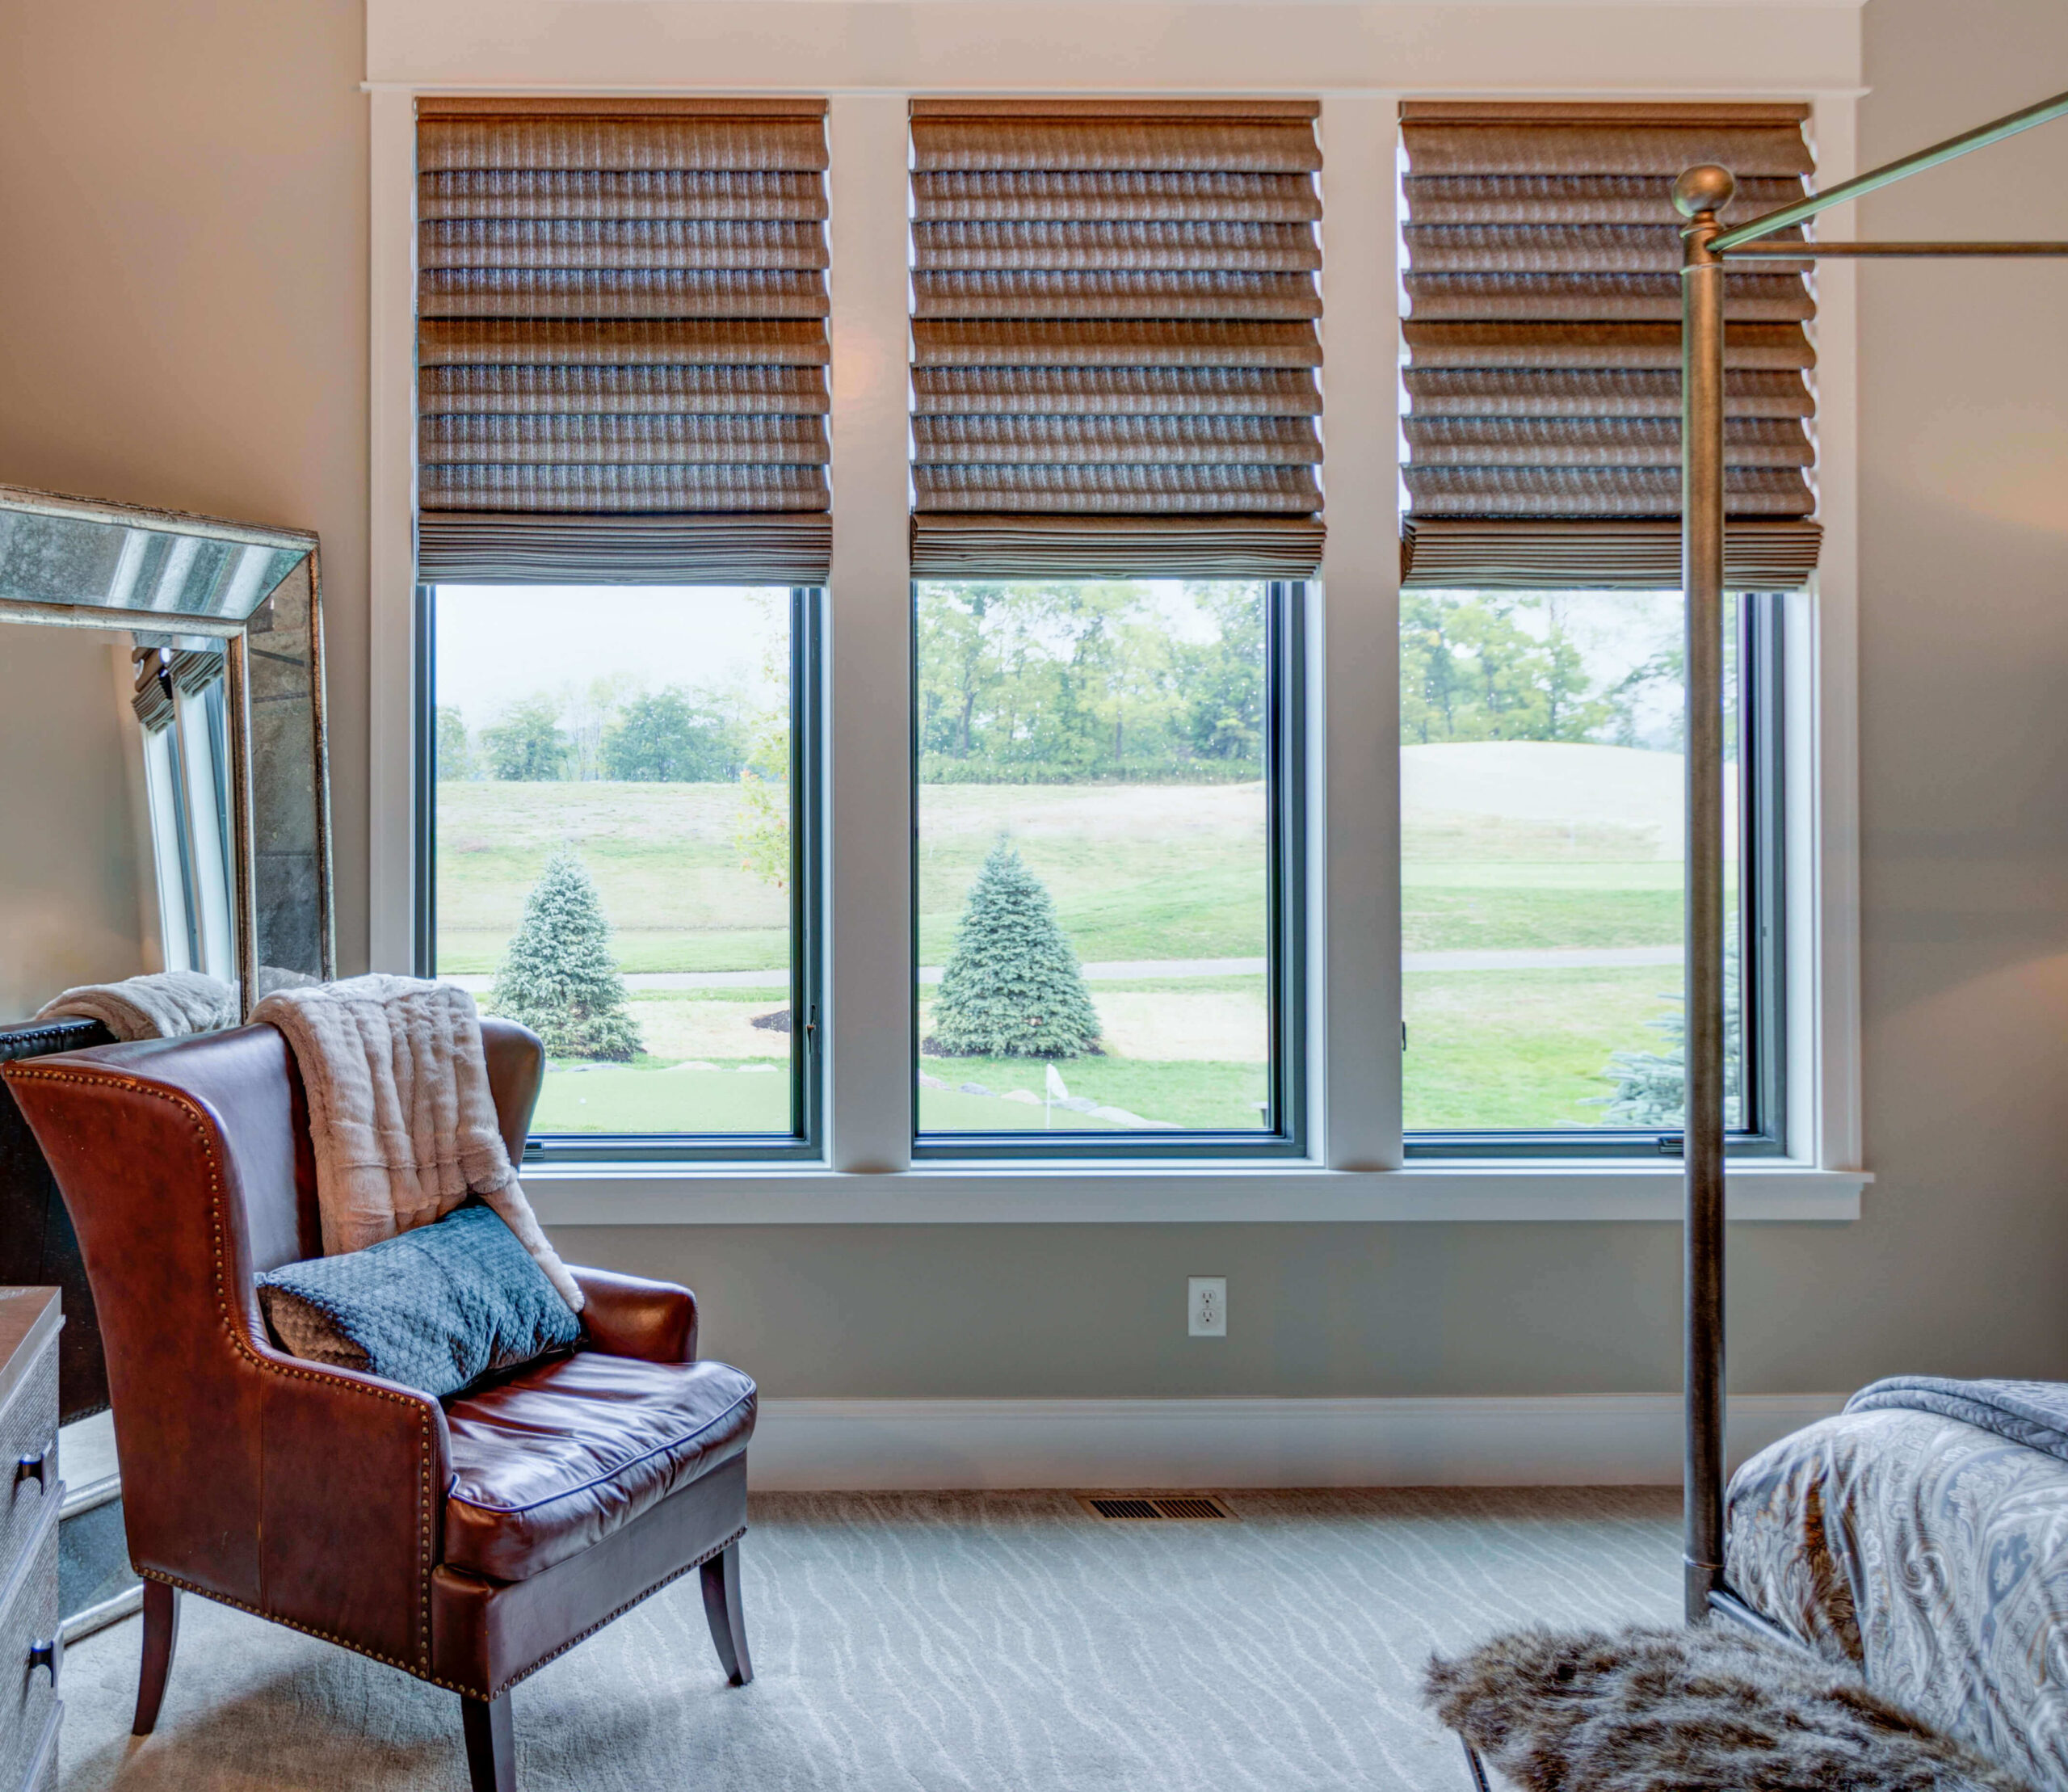 Window treatments that don't hide trim - Hunter Douglas Alustra® Collection of Vignette® Modern Roman Shades mounted inside the trim